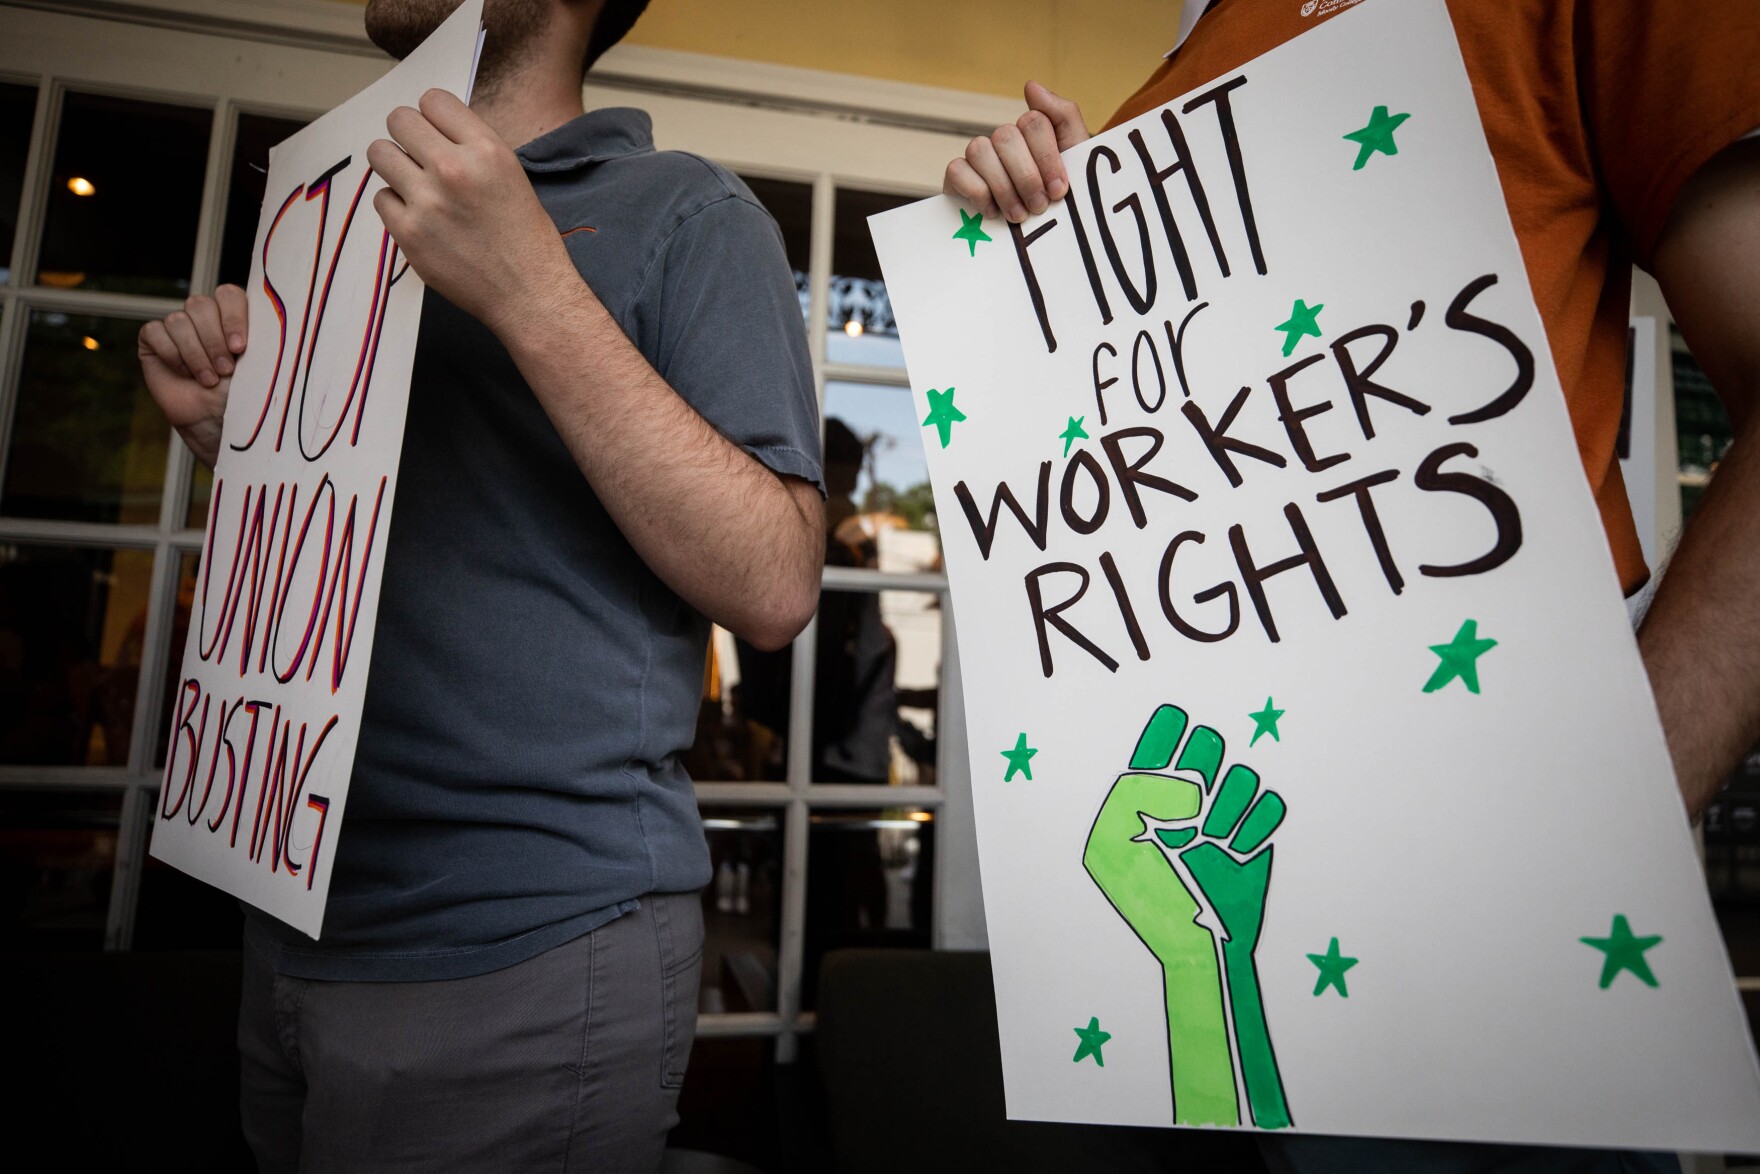 How do employees unionize in a right-to-work state like Texas?